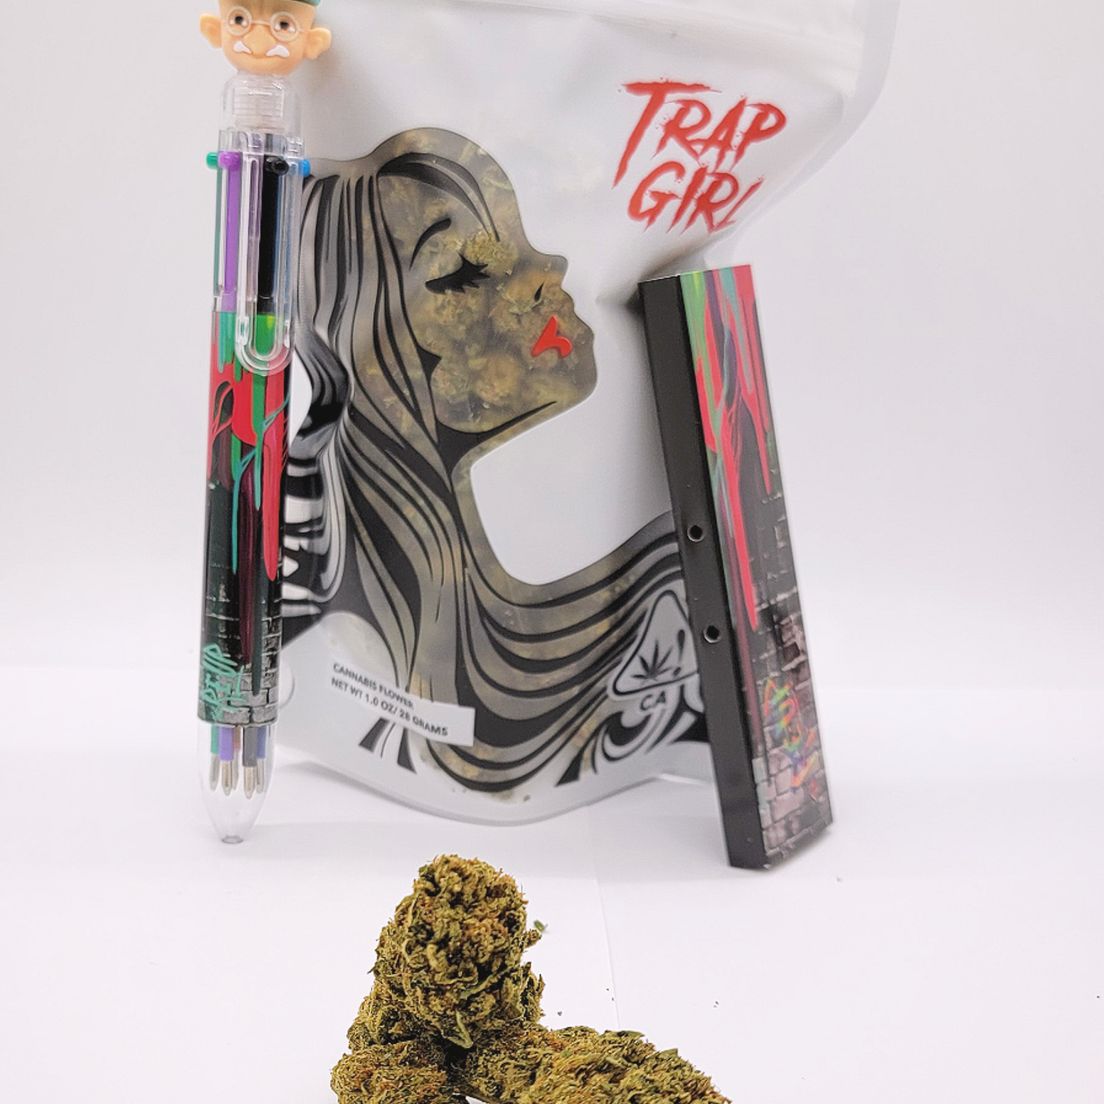 *Deal! $105 1 oz. Dosi Cake (27.98%/Indica) - Trap Girl + Multi-Color Pen + Rolling Papers